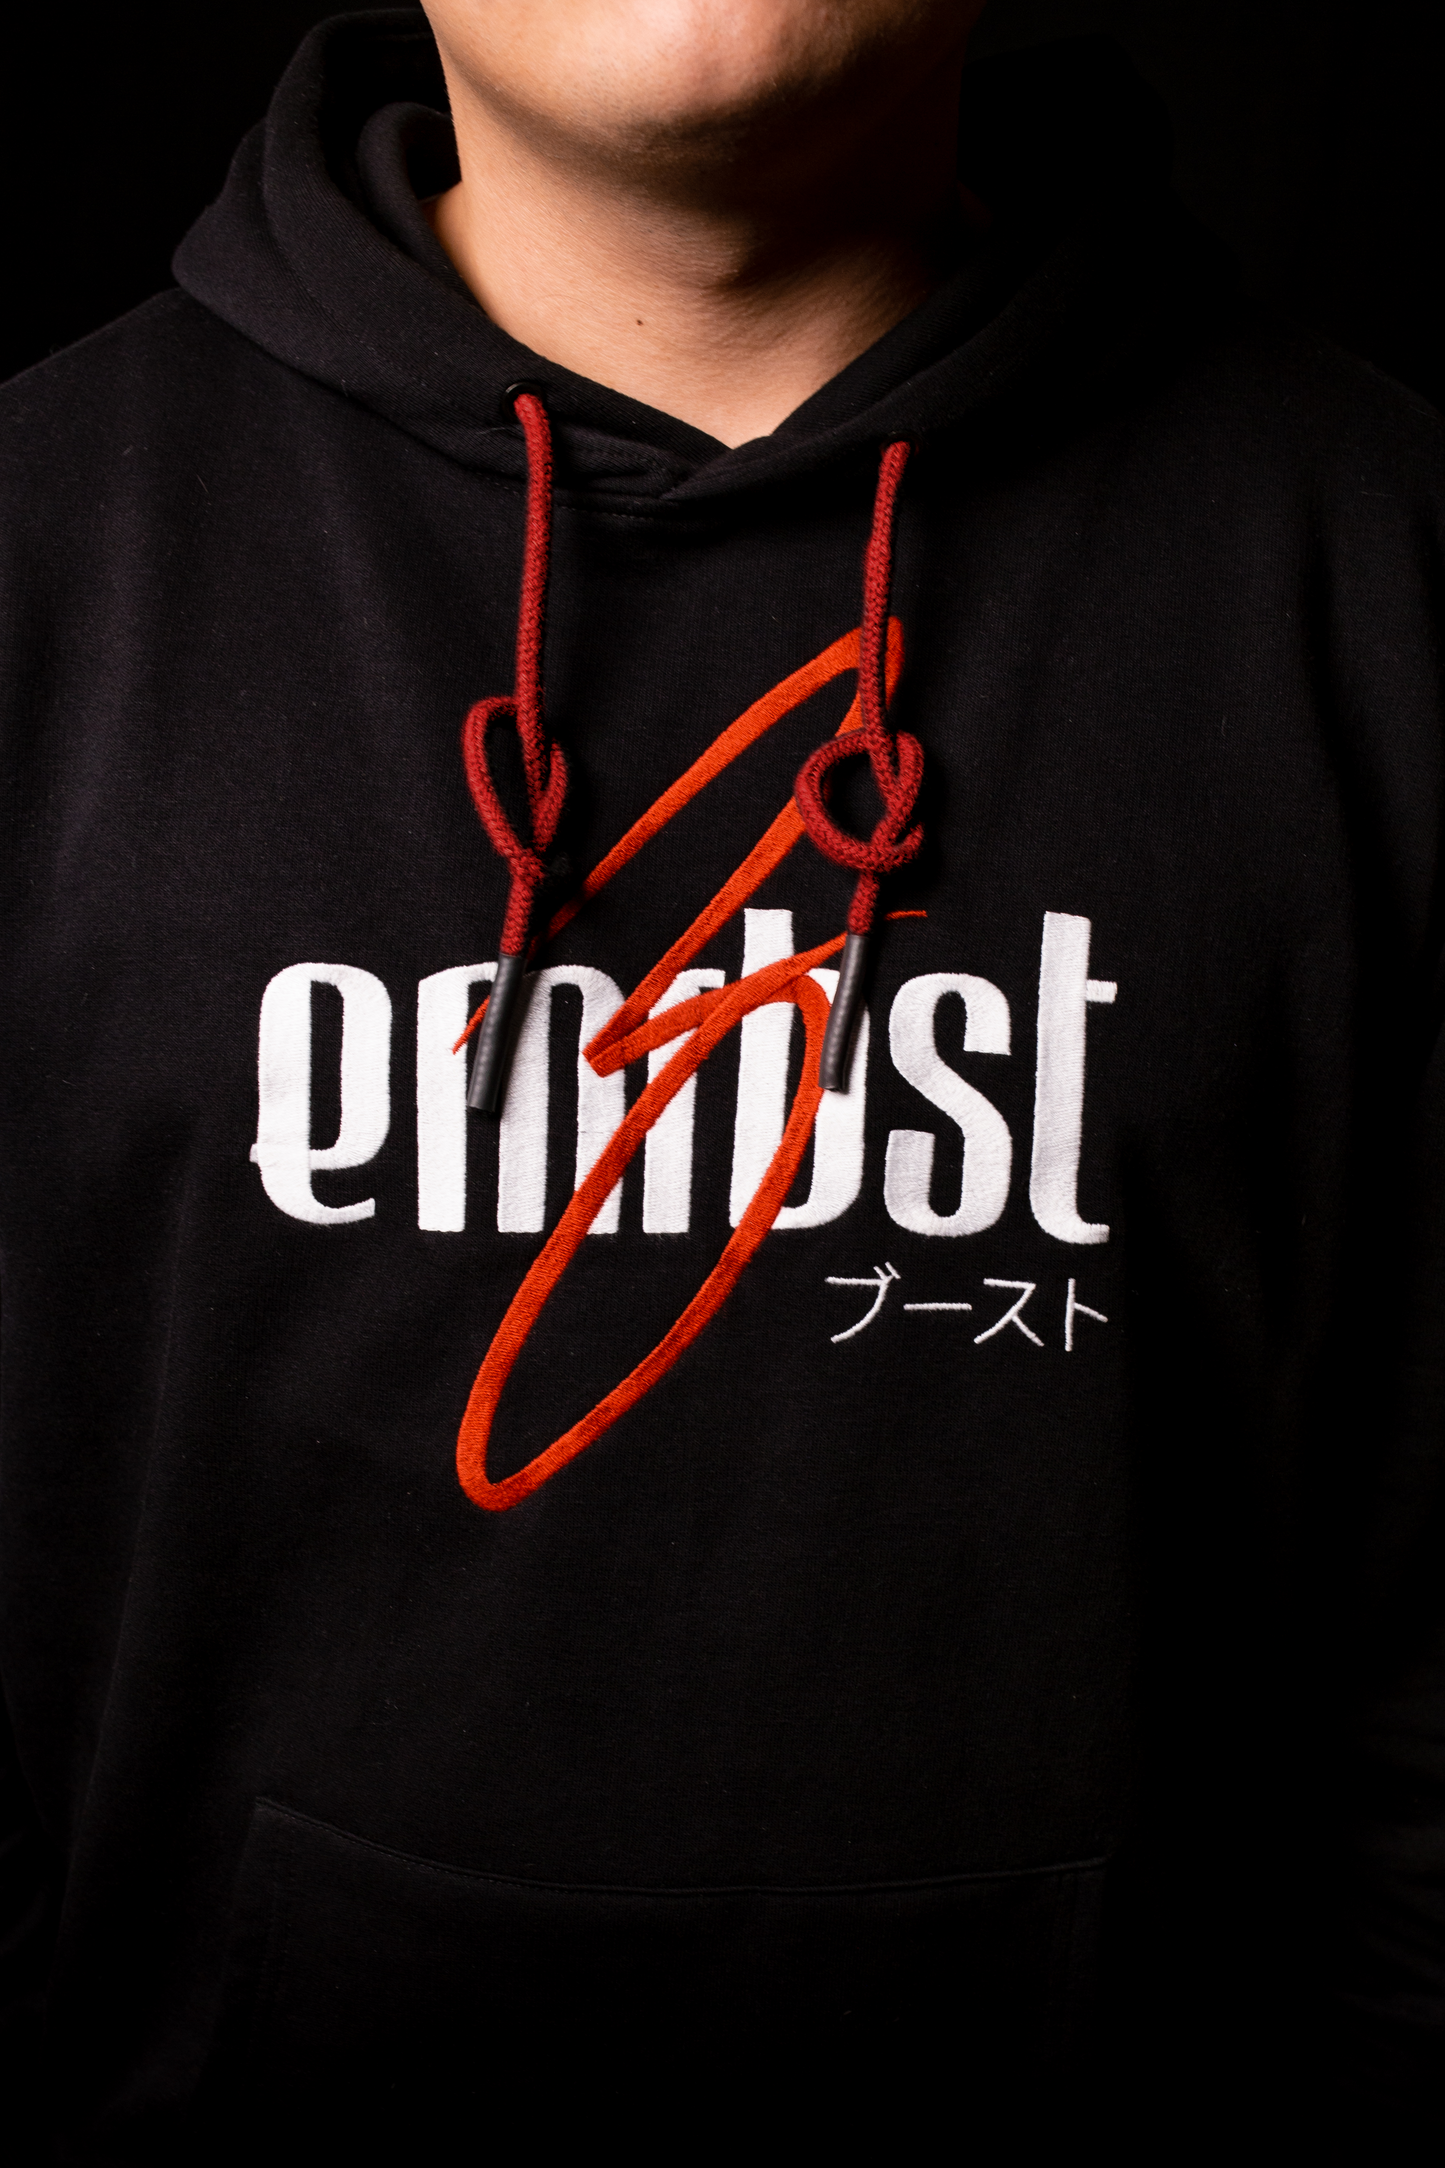 EMRBST Hoodie - Japan 2020 Limited Edition